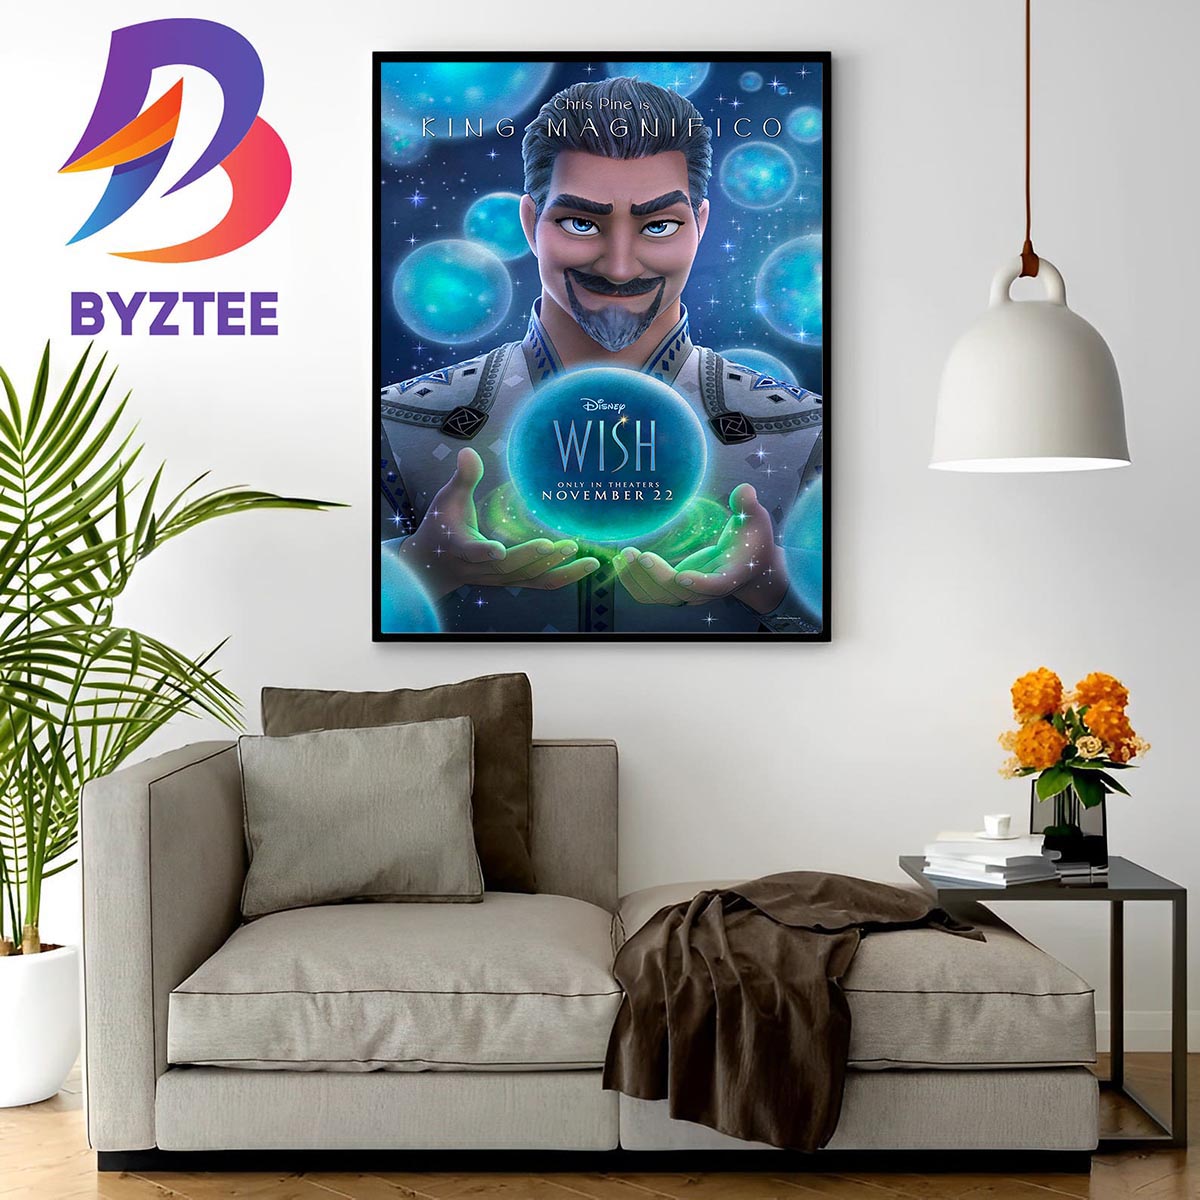 https://byztee.com/wp-content/uploads/2023/07/Chris-Pine-Is-King-Magnifico-In-Wish-Of-Disney-Home-Decor-Poster-Canvas_8723478-1.jpg